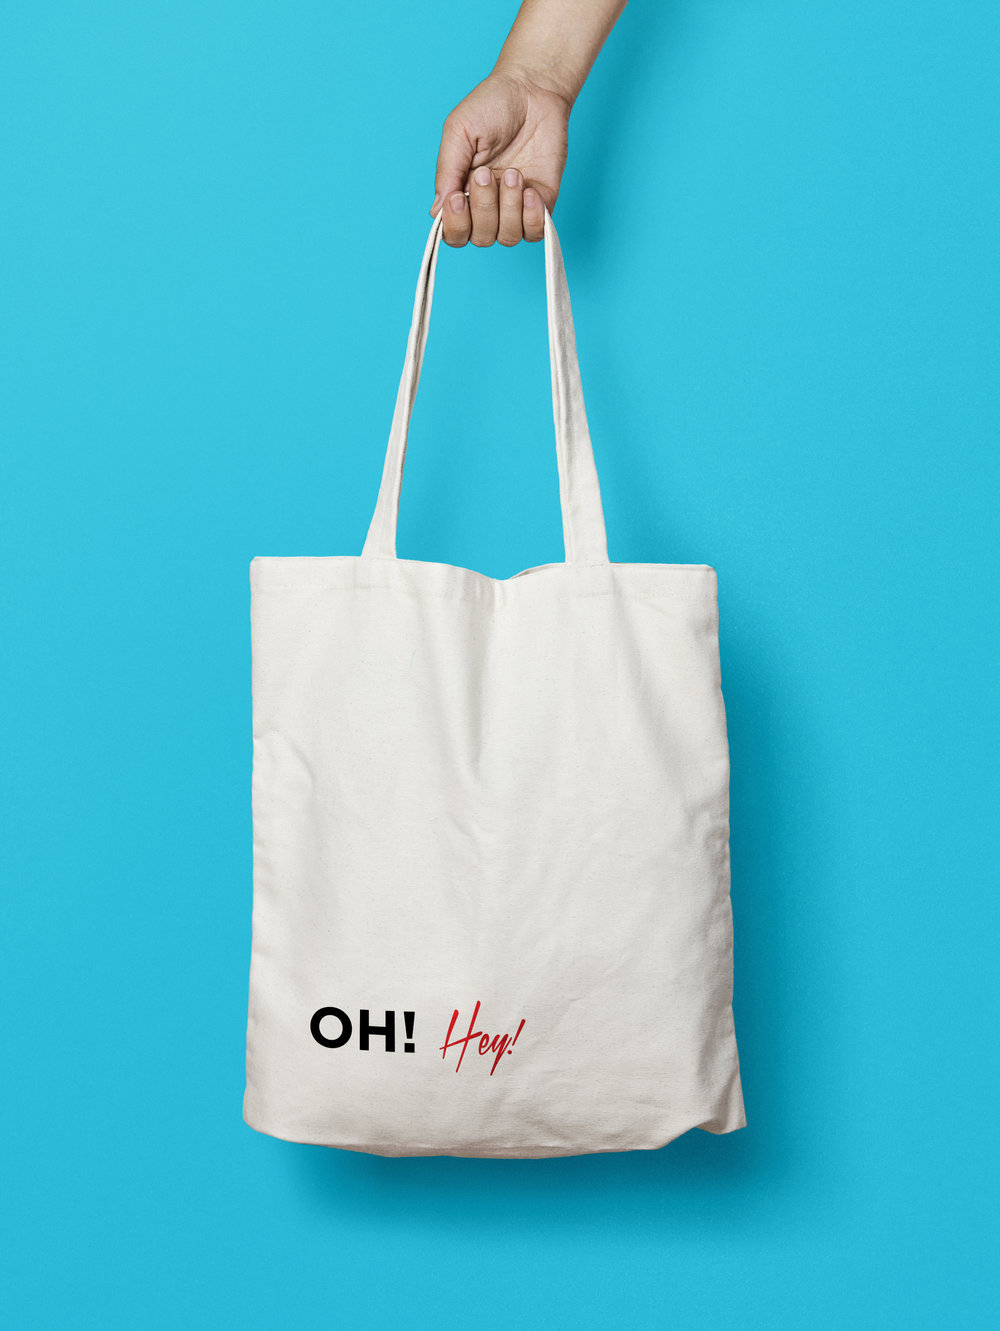 Download Oh Hey Tote Bags Yay London